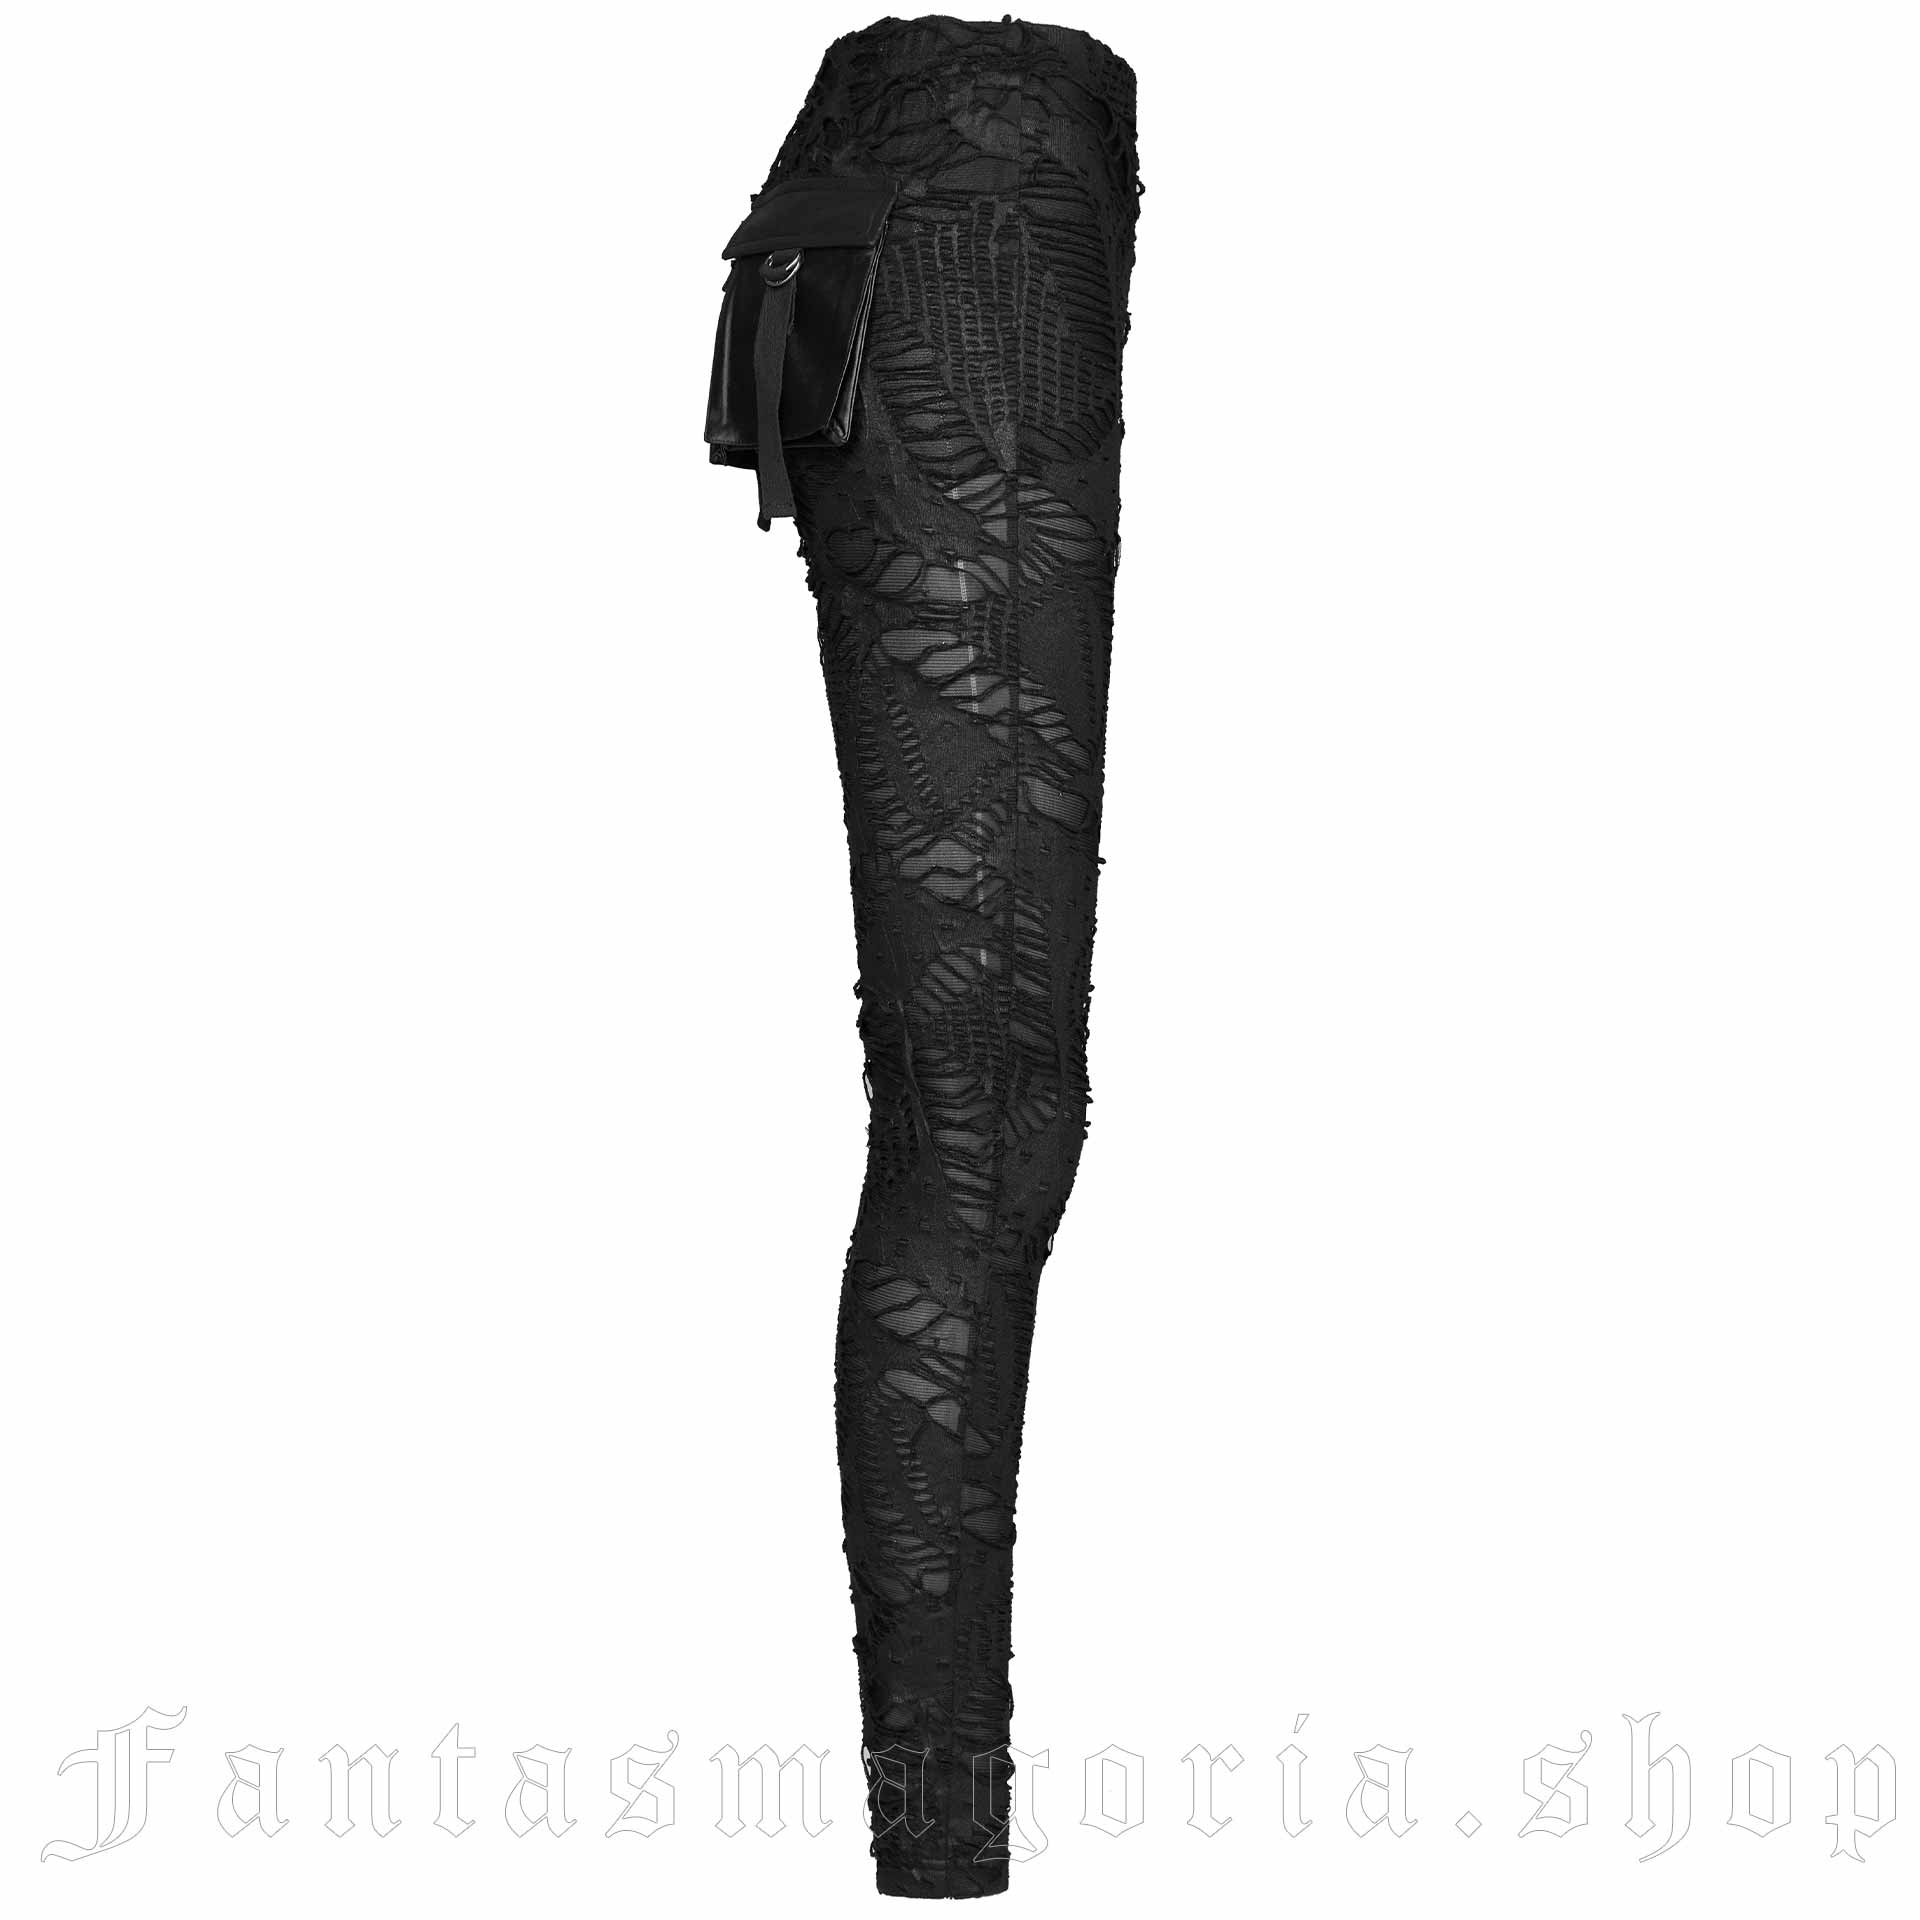 Russian Fire Flame Print Stretchy Heated Leggings For Women Punk Style  Casual Pants 201204 From Kong003, $10.43